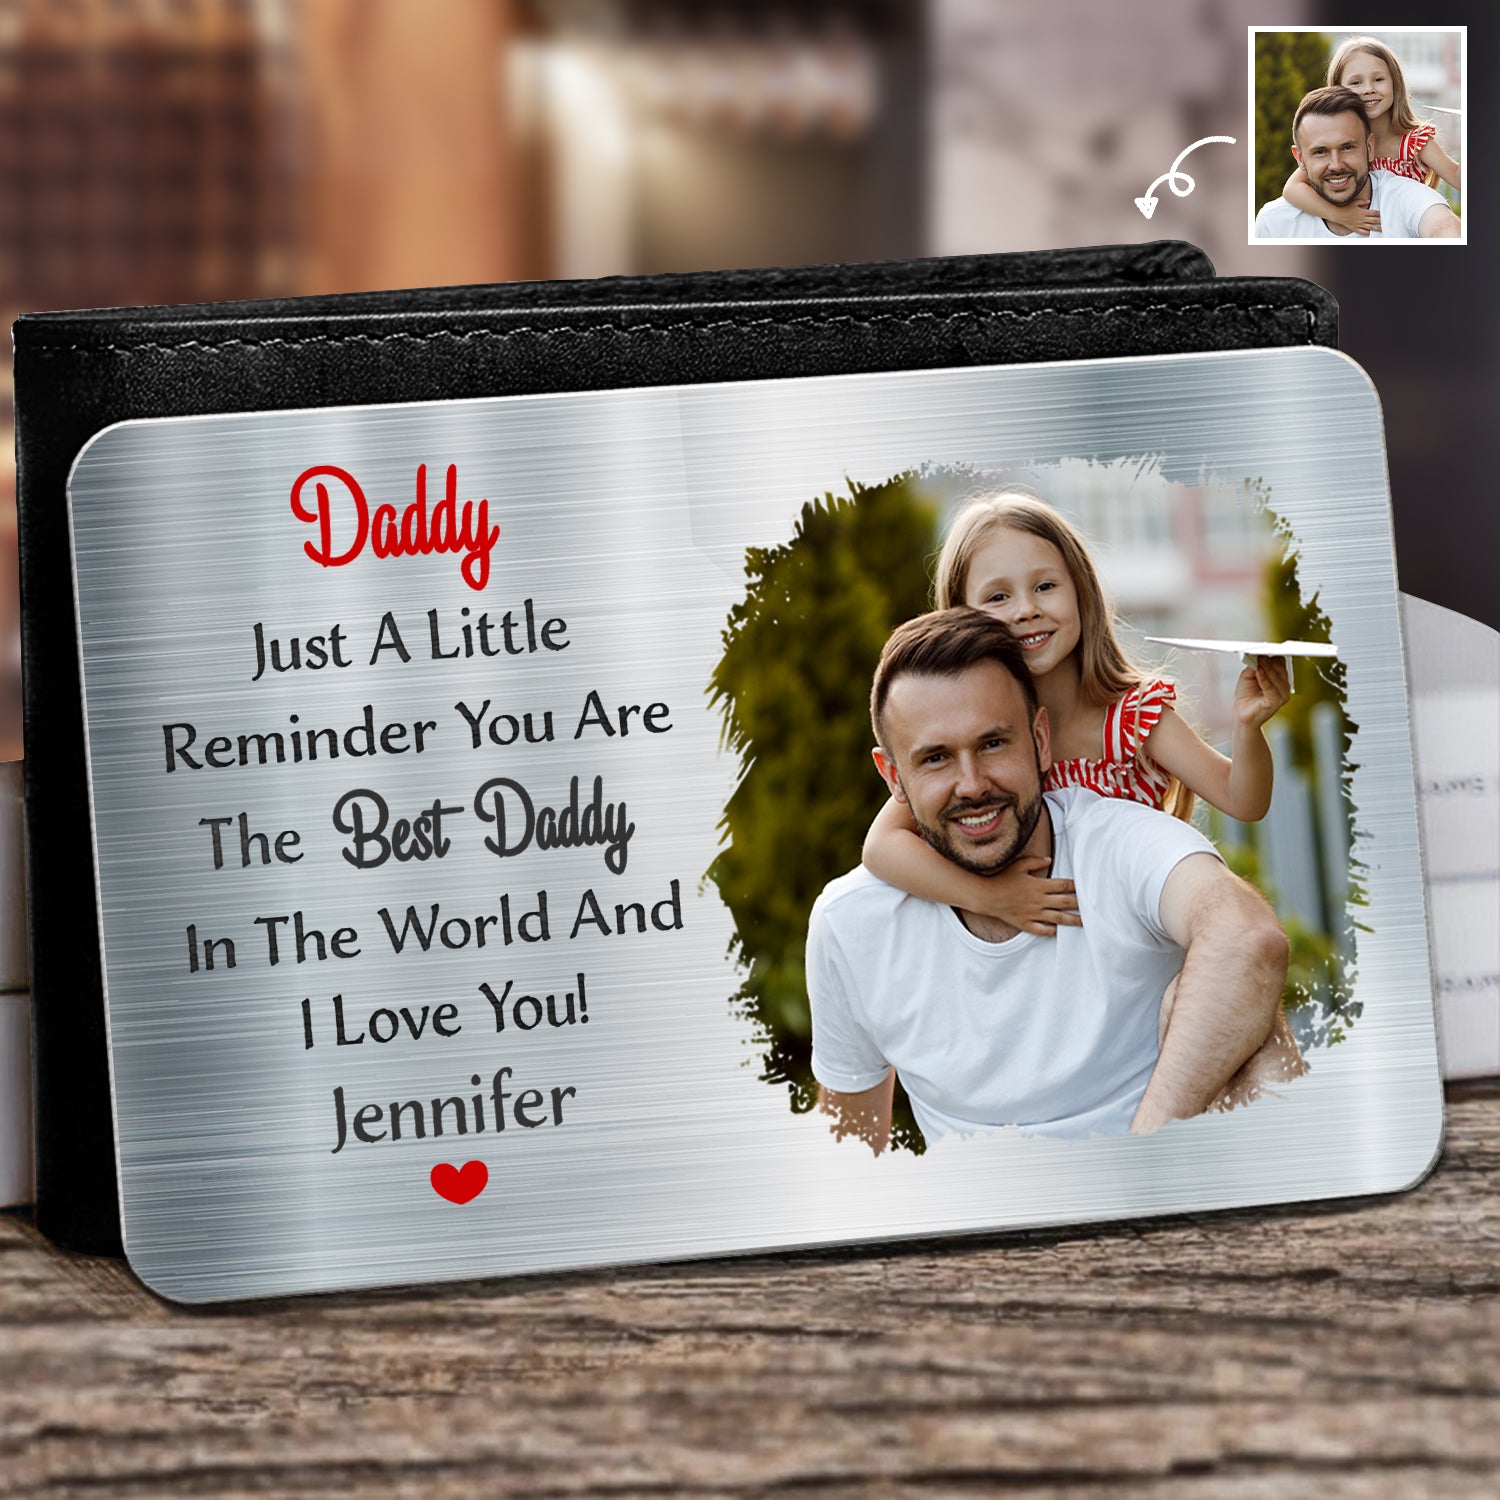 Top 38 Awesome Father's Day Personalized Gifts & Surprises Online to Make  Your Dad Feel Extra Special